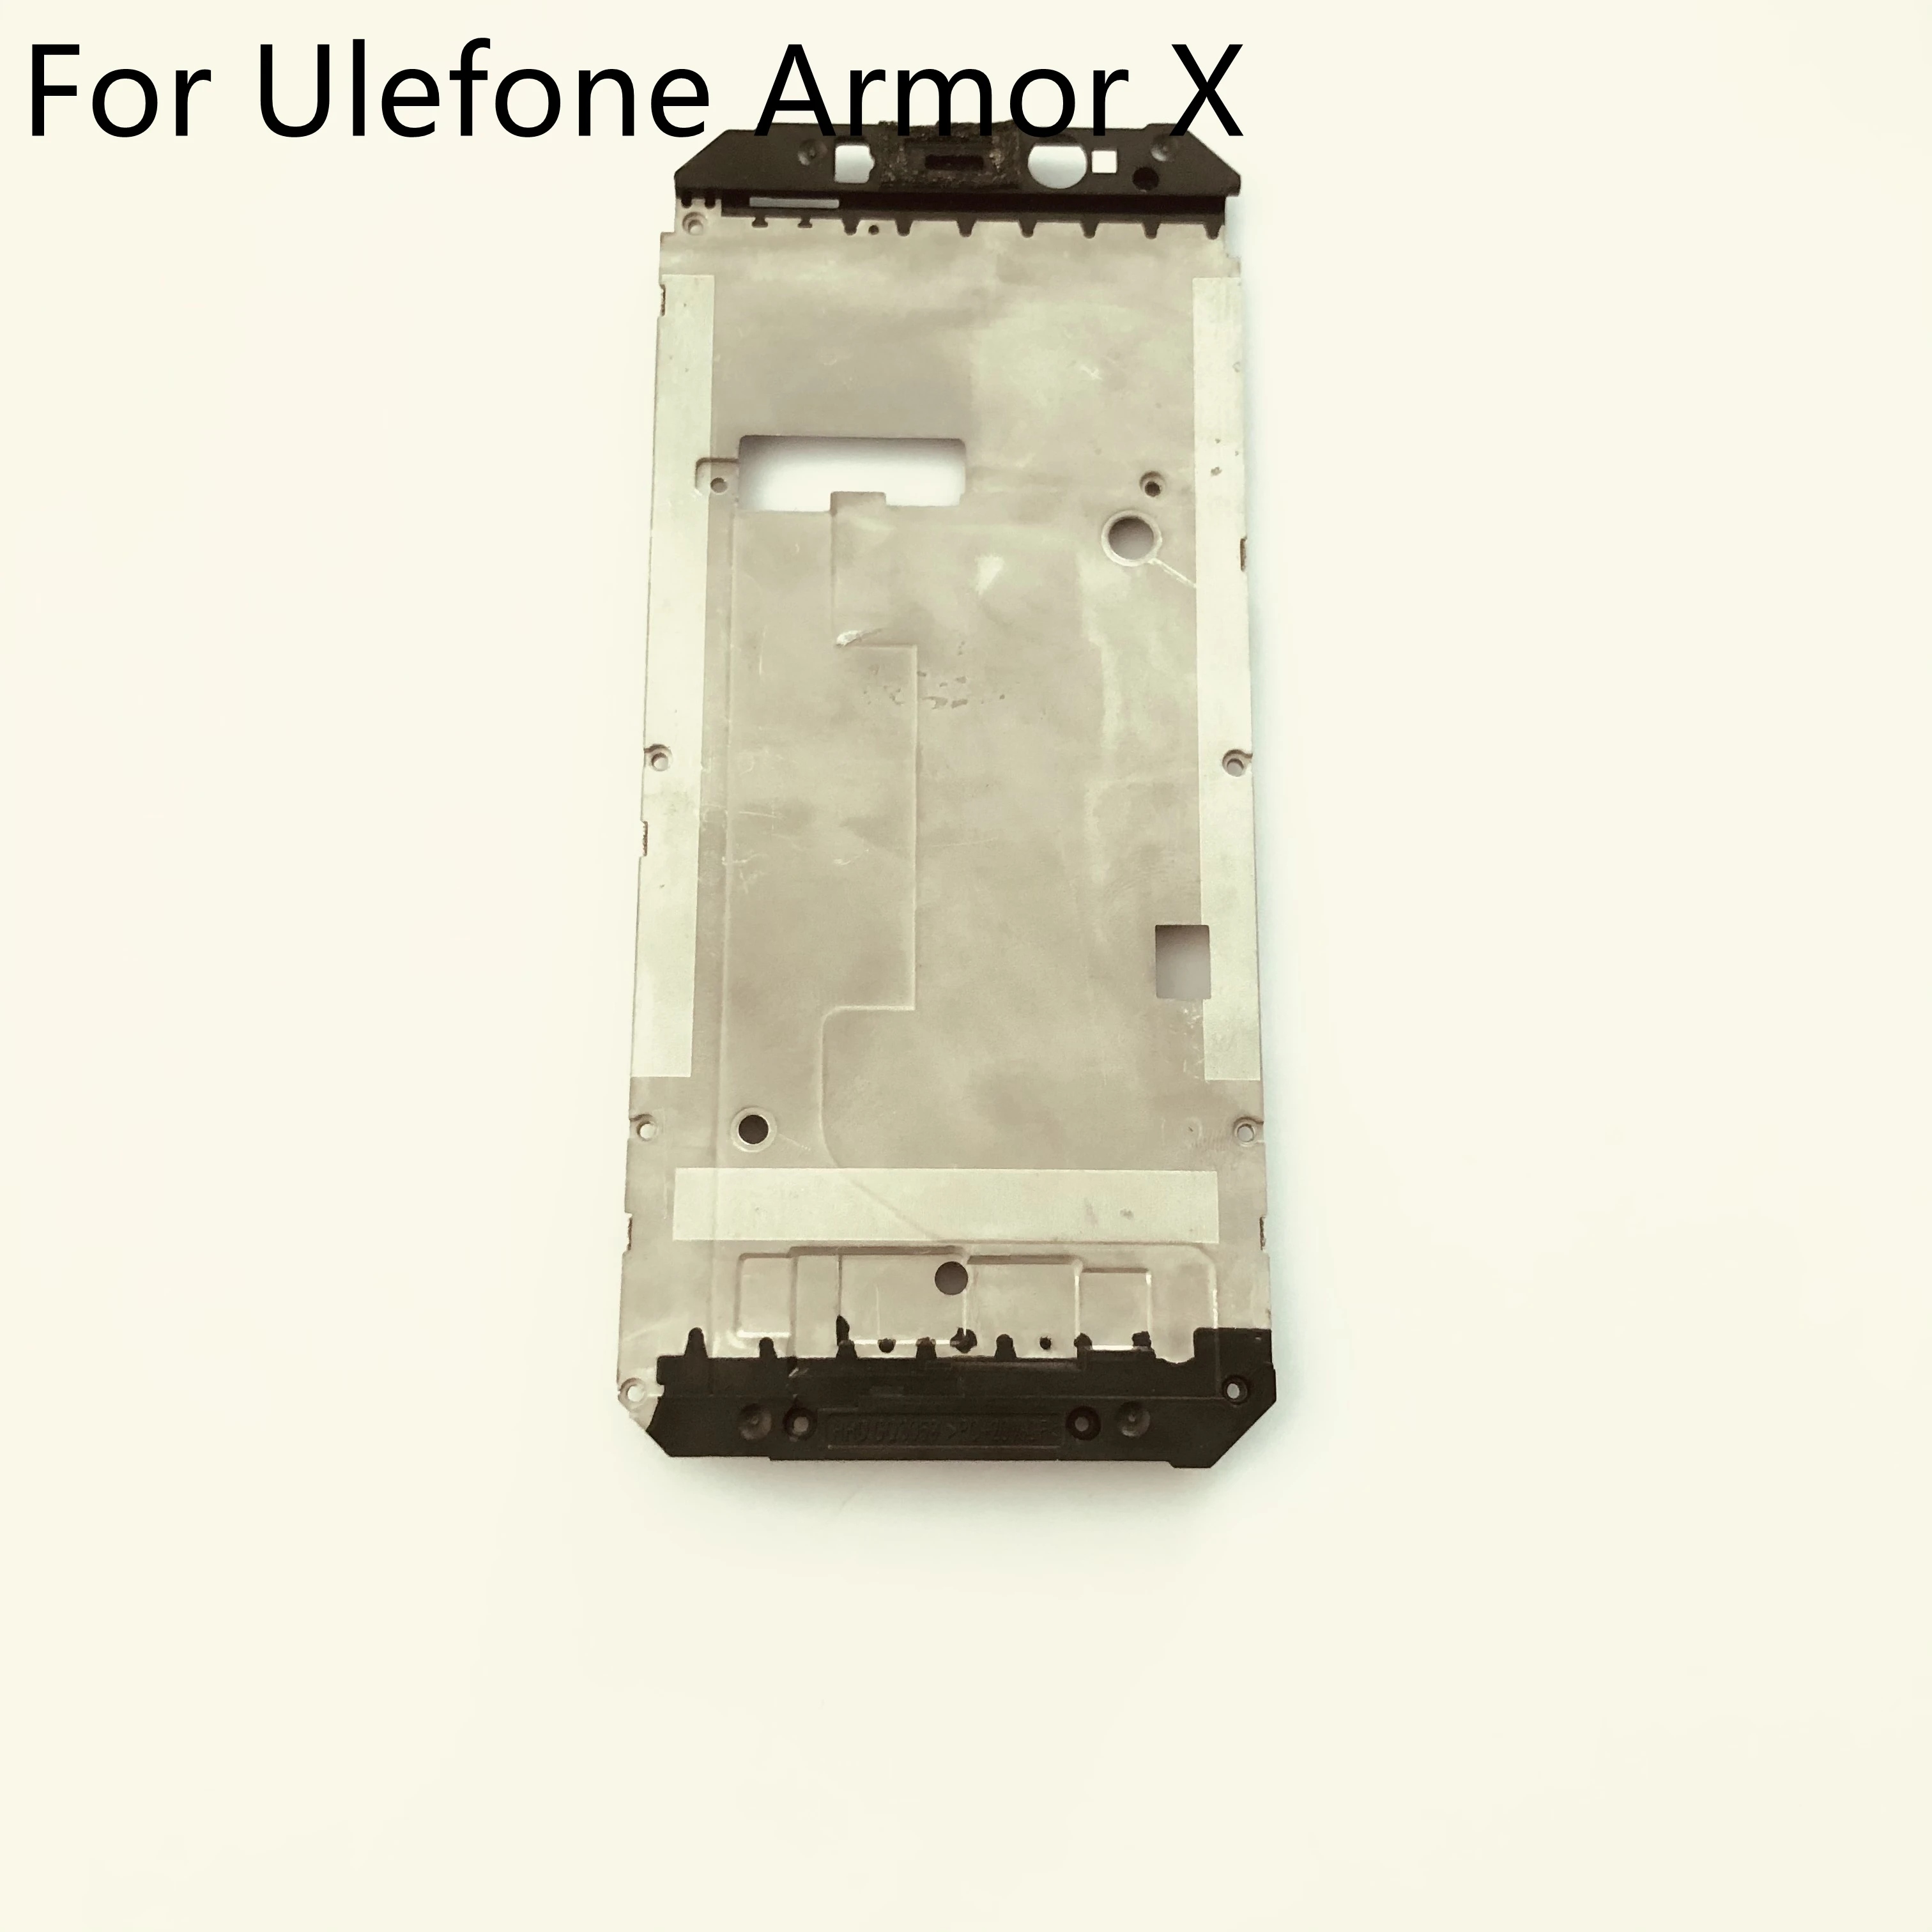 

Ulefone Armor X LCD Middle Frame Shell Case For Ulefone Armor X MTK6739 5.5" 1440x720 Smartphone